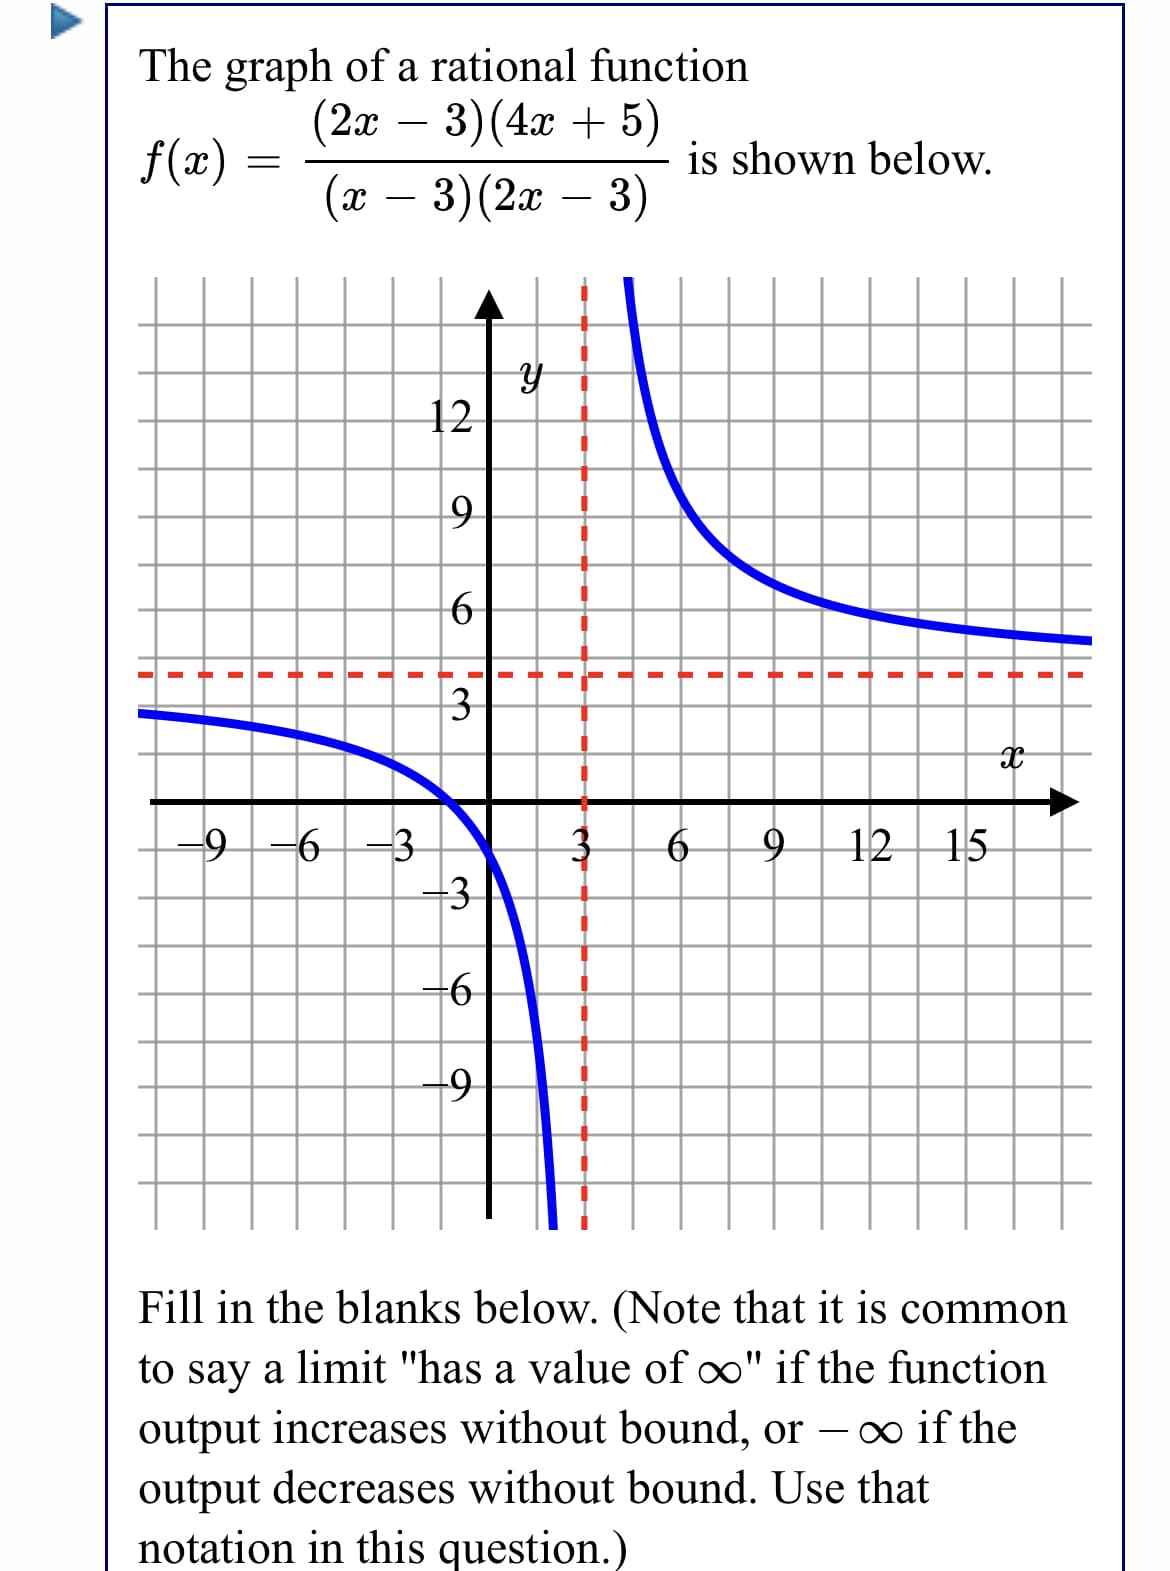 The graph of a rational function
(2а —
3)(4x + 5)
f(x)
is shown below.
(x)
(г — 3)(2а — 3)
12
3
9-6
12 15
Fill in the blanks below. (Note that it is common
to say a limit "has a value of o" if the function
output increases without bound, or –o if the
output decreases without bound. Use that
notation in this question.)
-
3.
